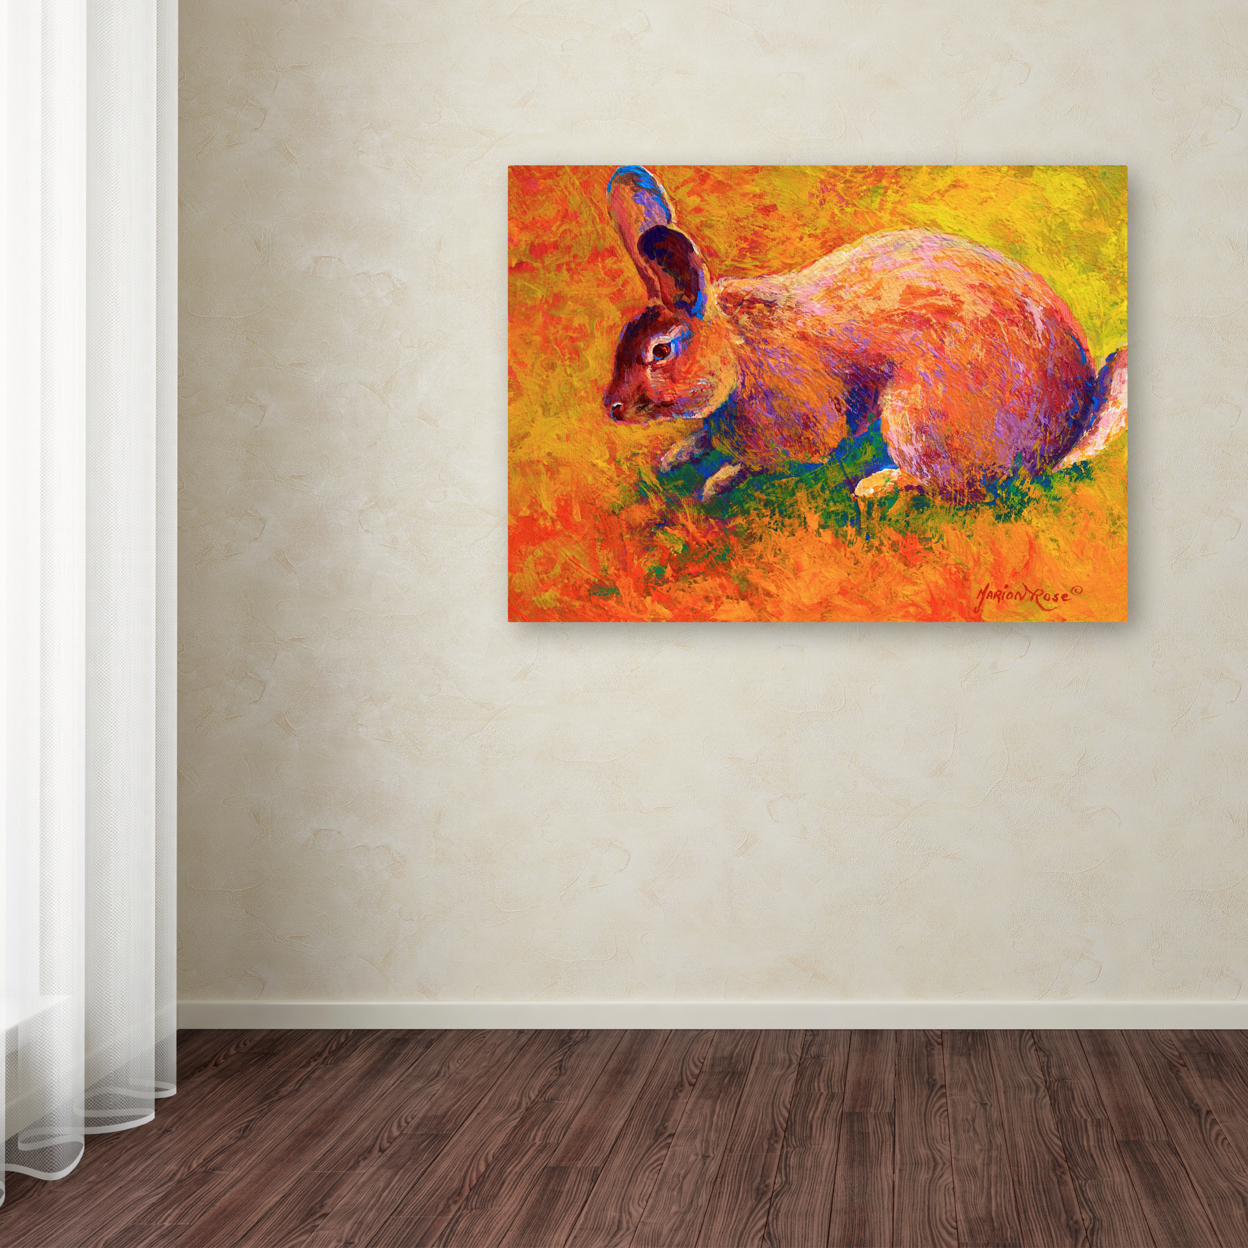 Marion Rose 'Rabbit 1' Ready To Hang Canvas Art 35 X 47 Inches Made In USA